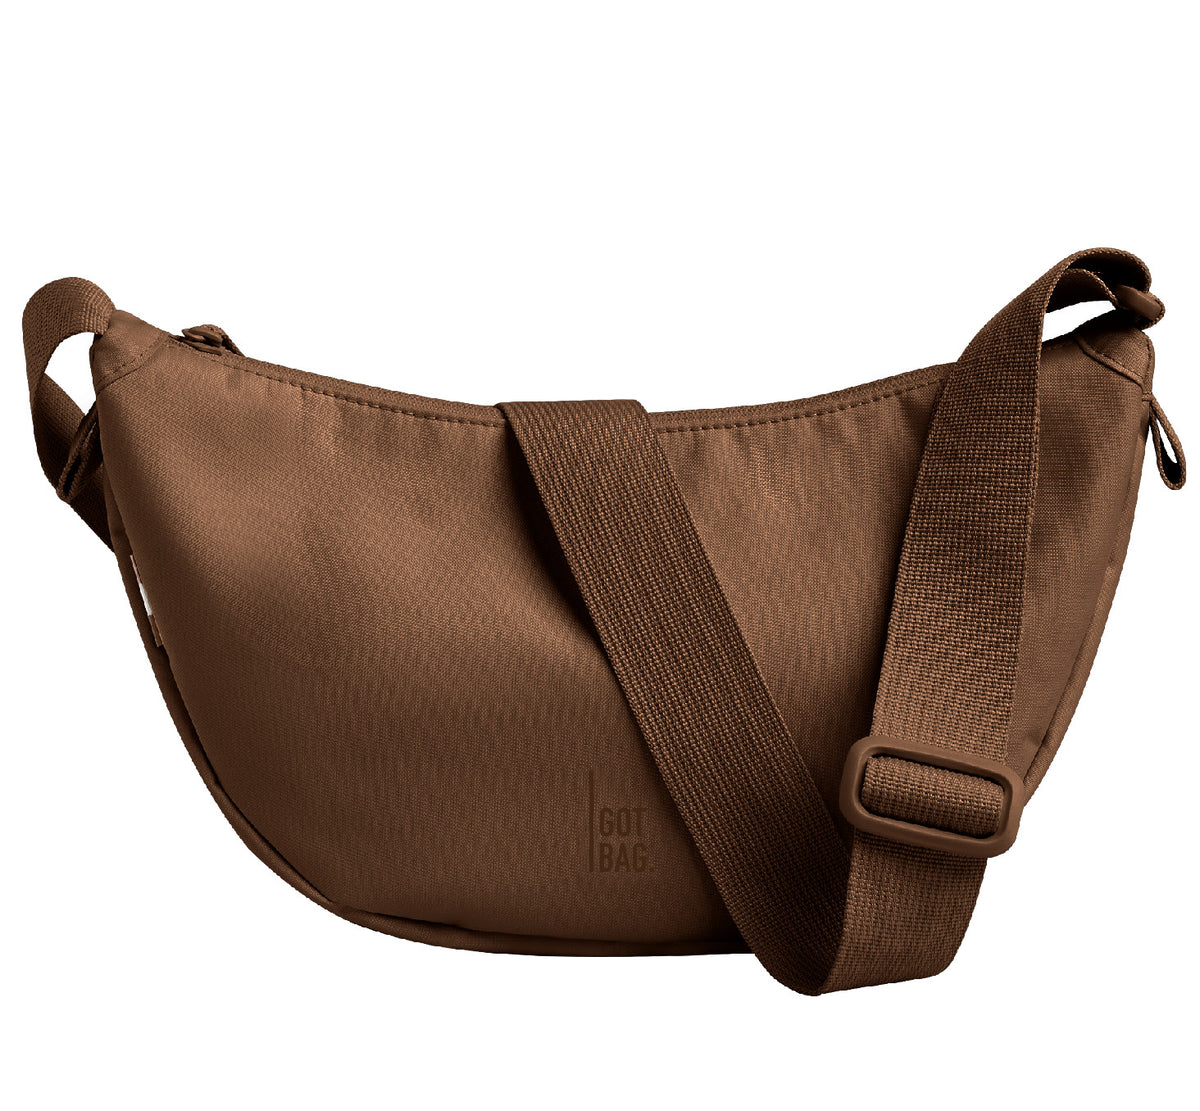 Umhängetasche "MOON Bag Small / Trench"